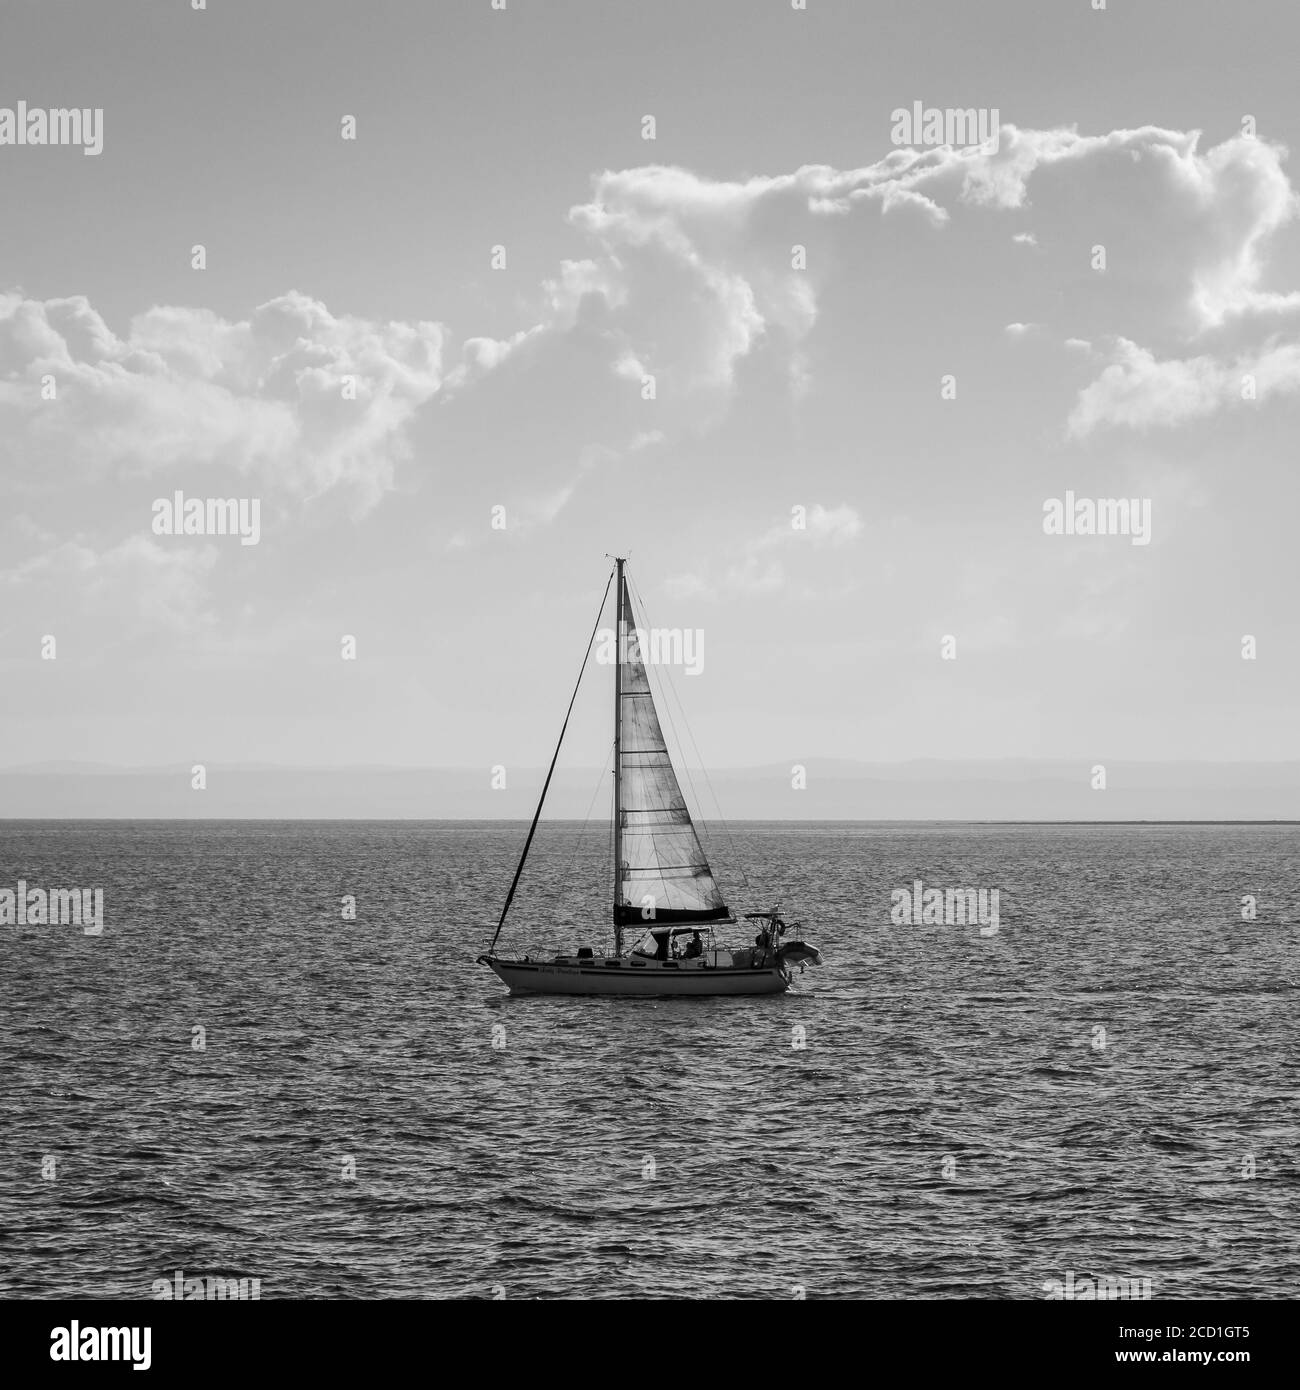 Sailing boat on the ocean in black and white Stock Photo